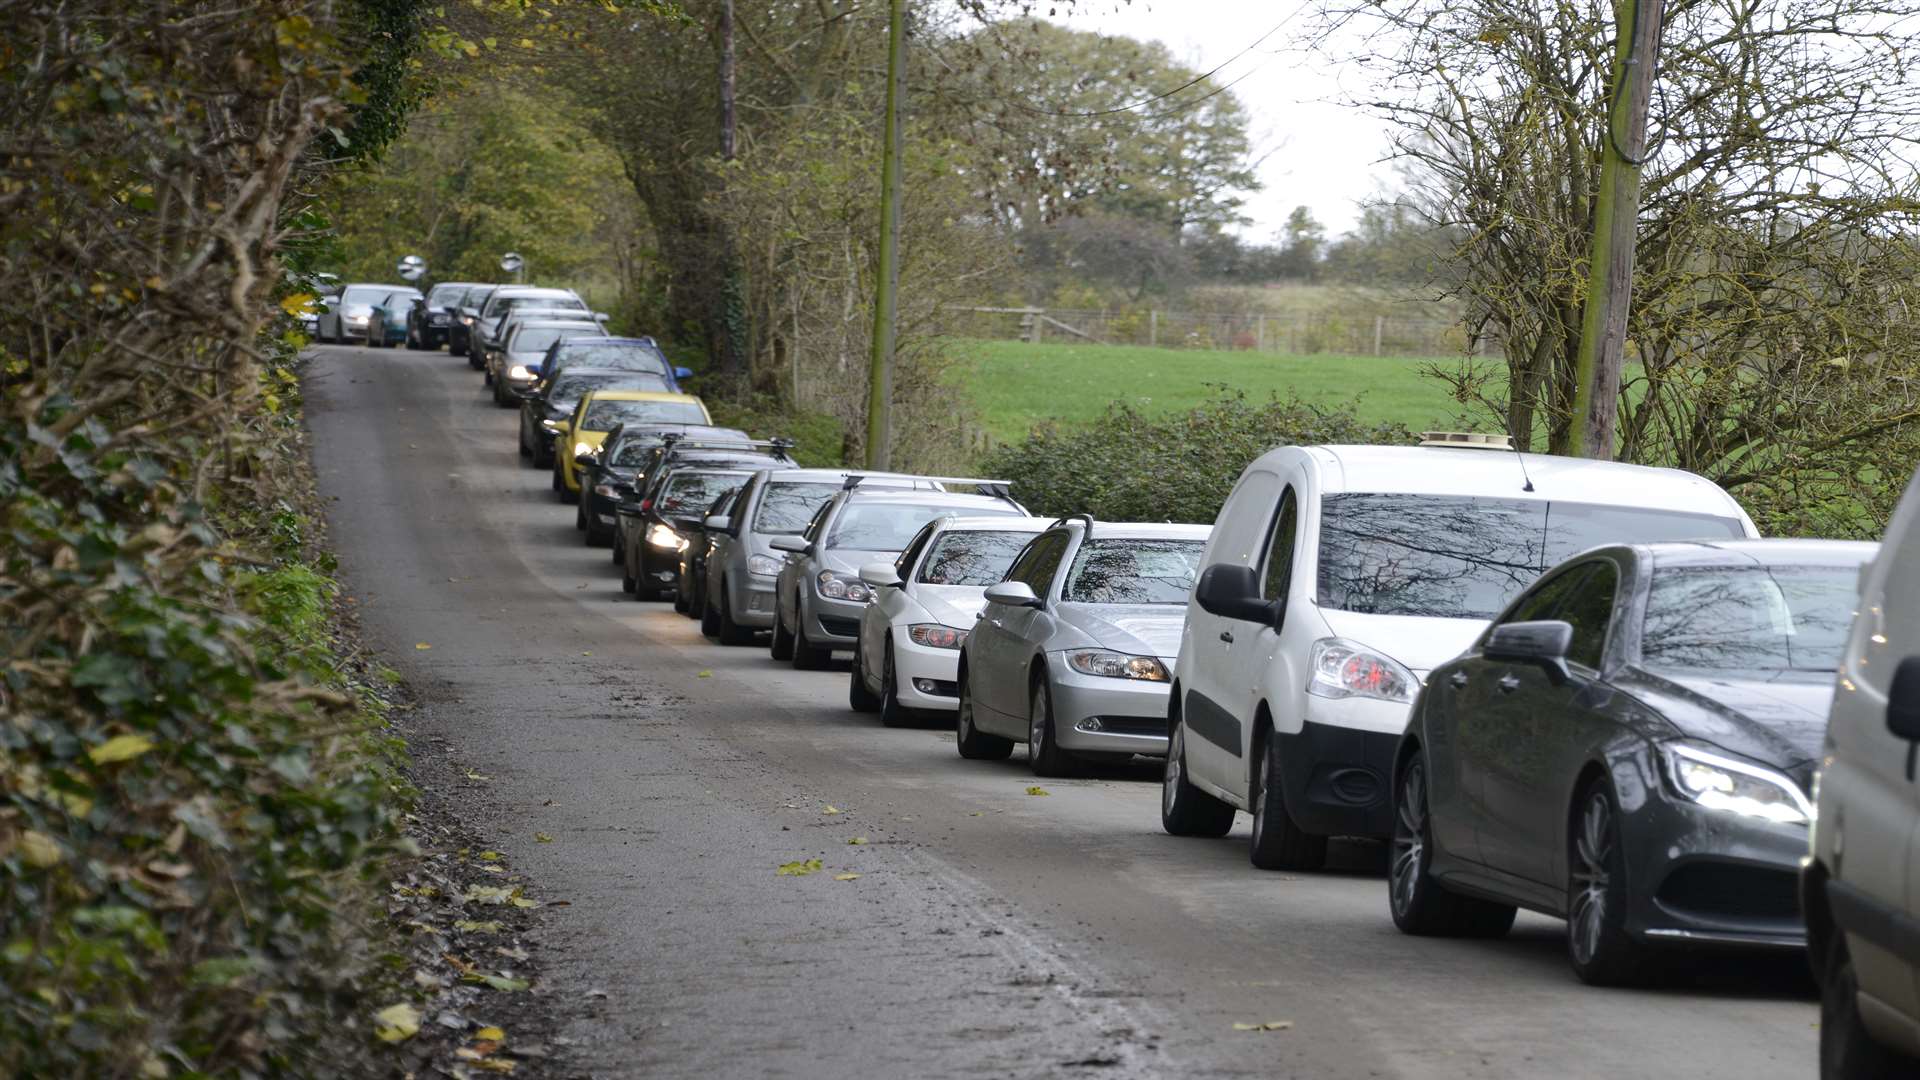 Cars back up along the lane before the funeral of Connor McDonald